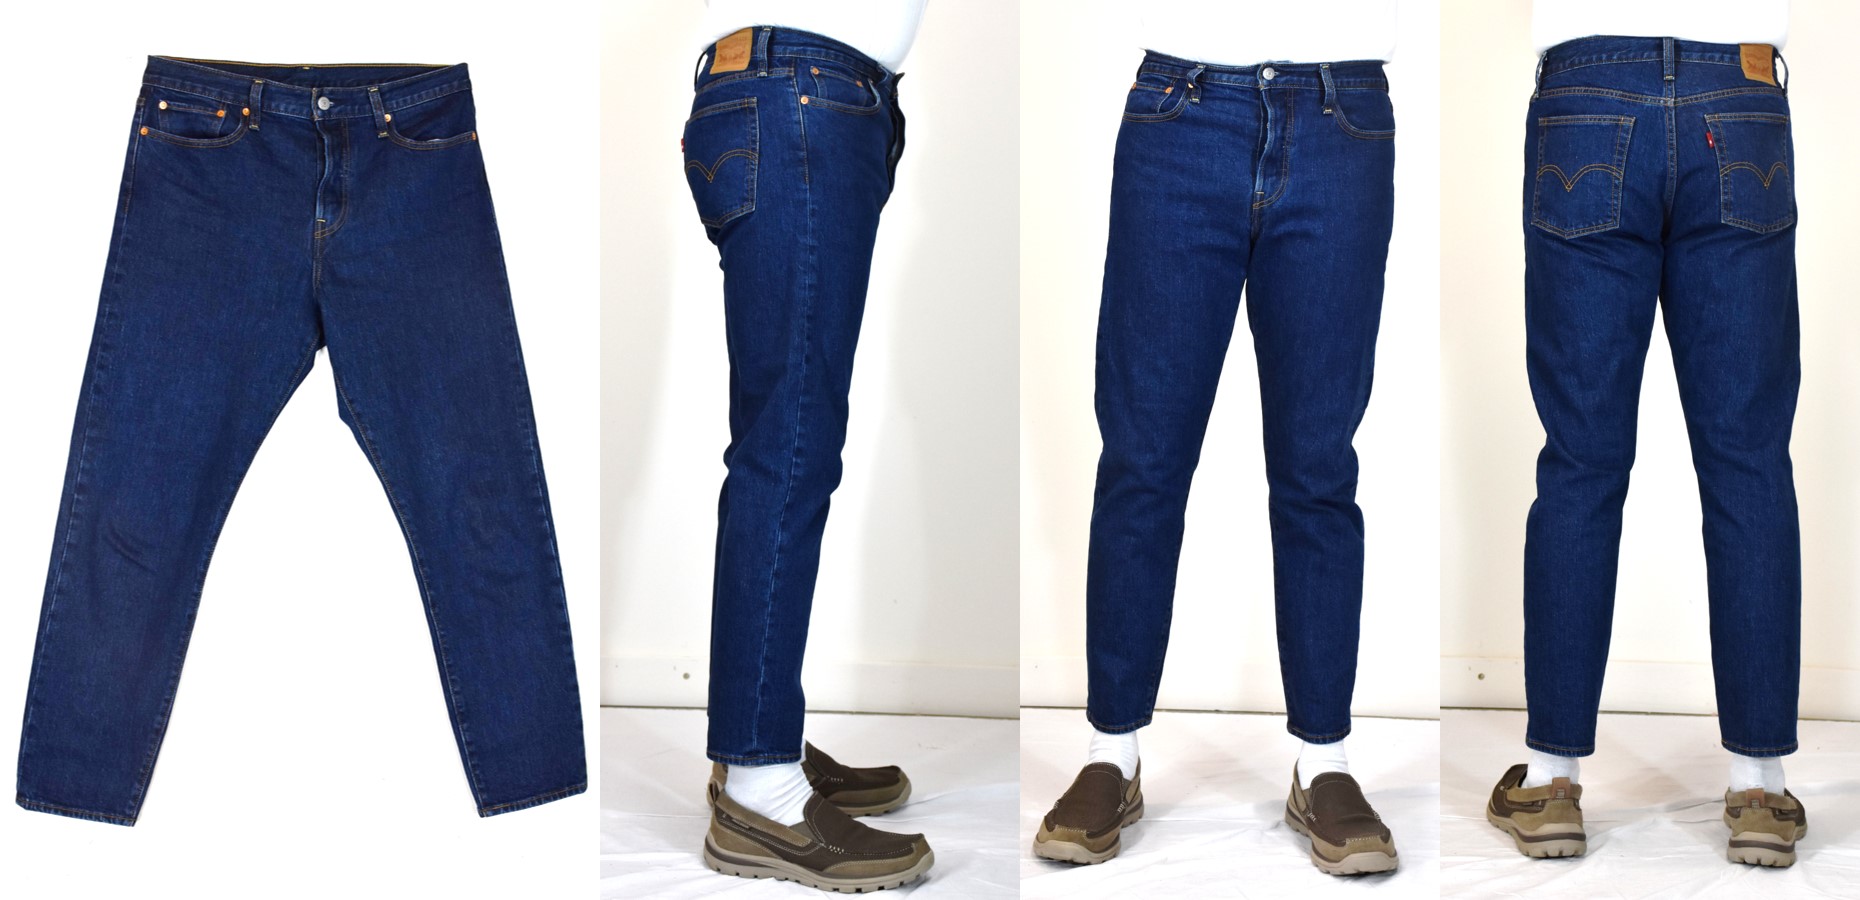 How do relaxed jeans compare against straight jeans? - Quora